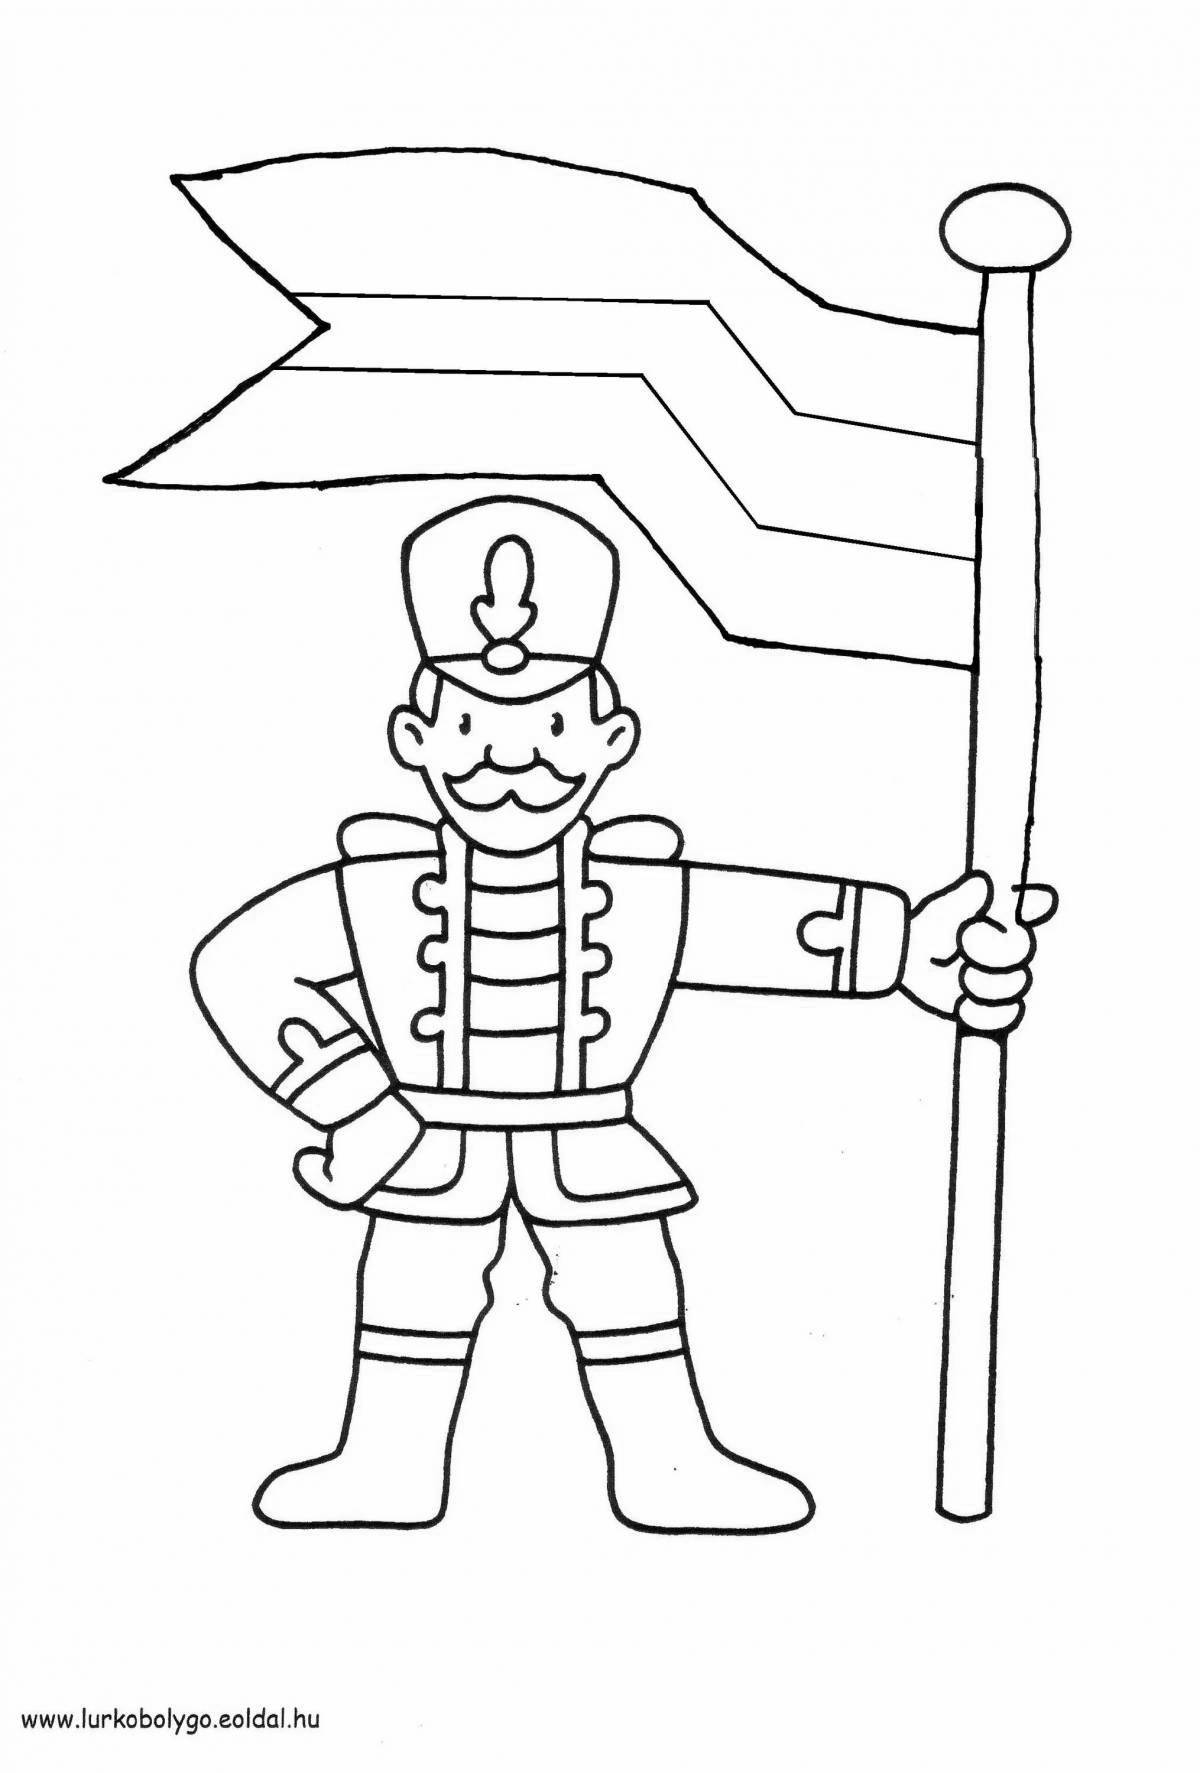 Impressive hussars coloring page